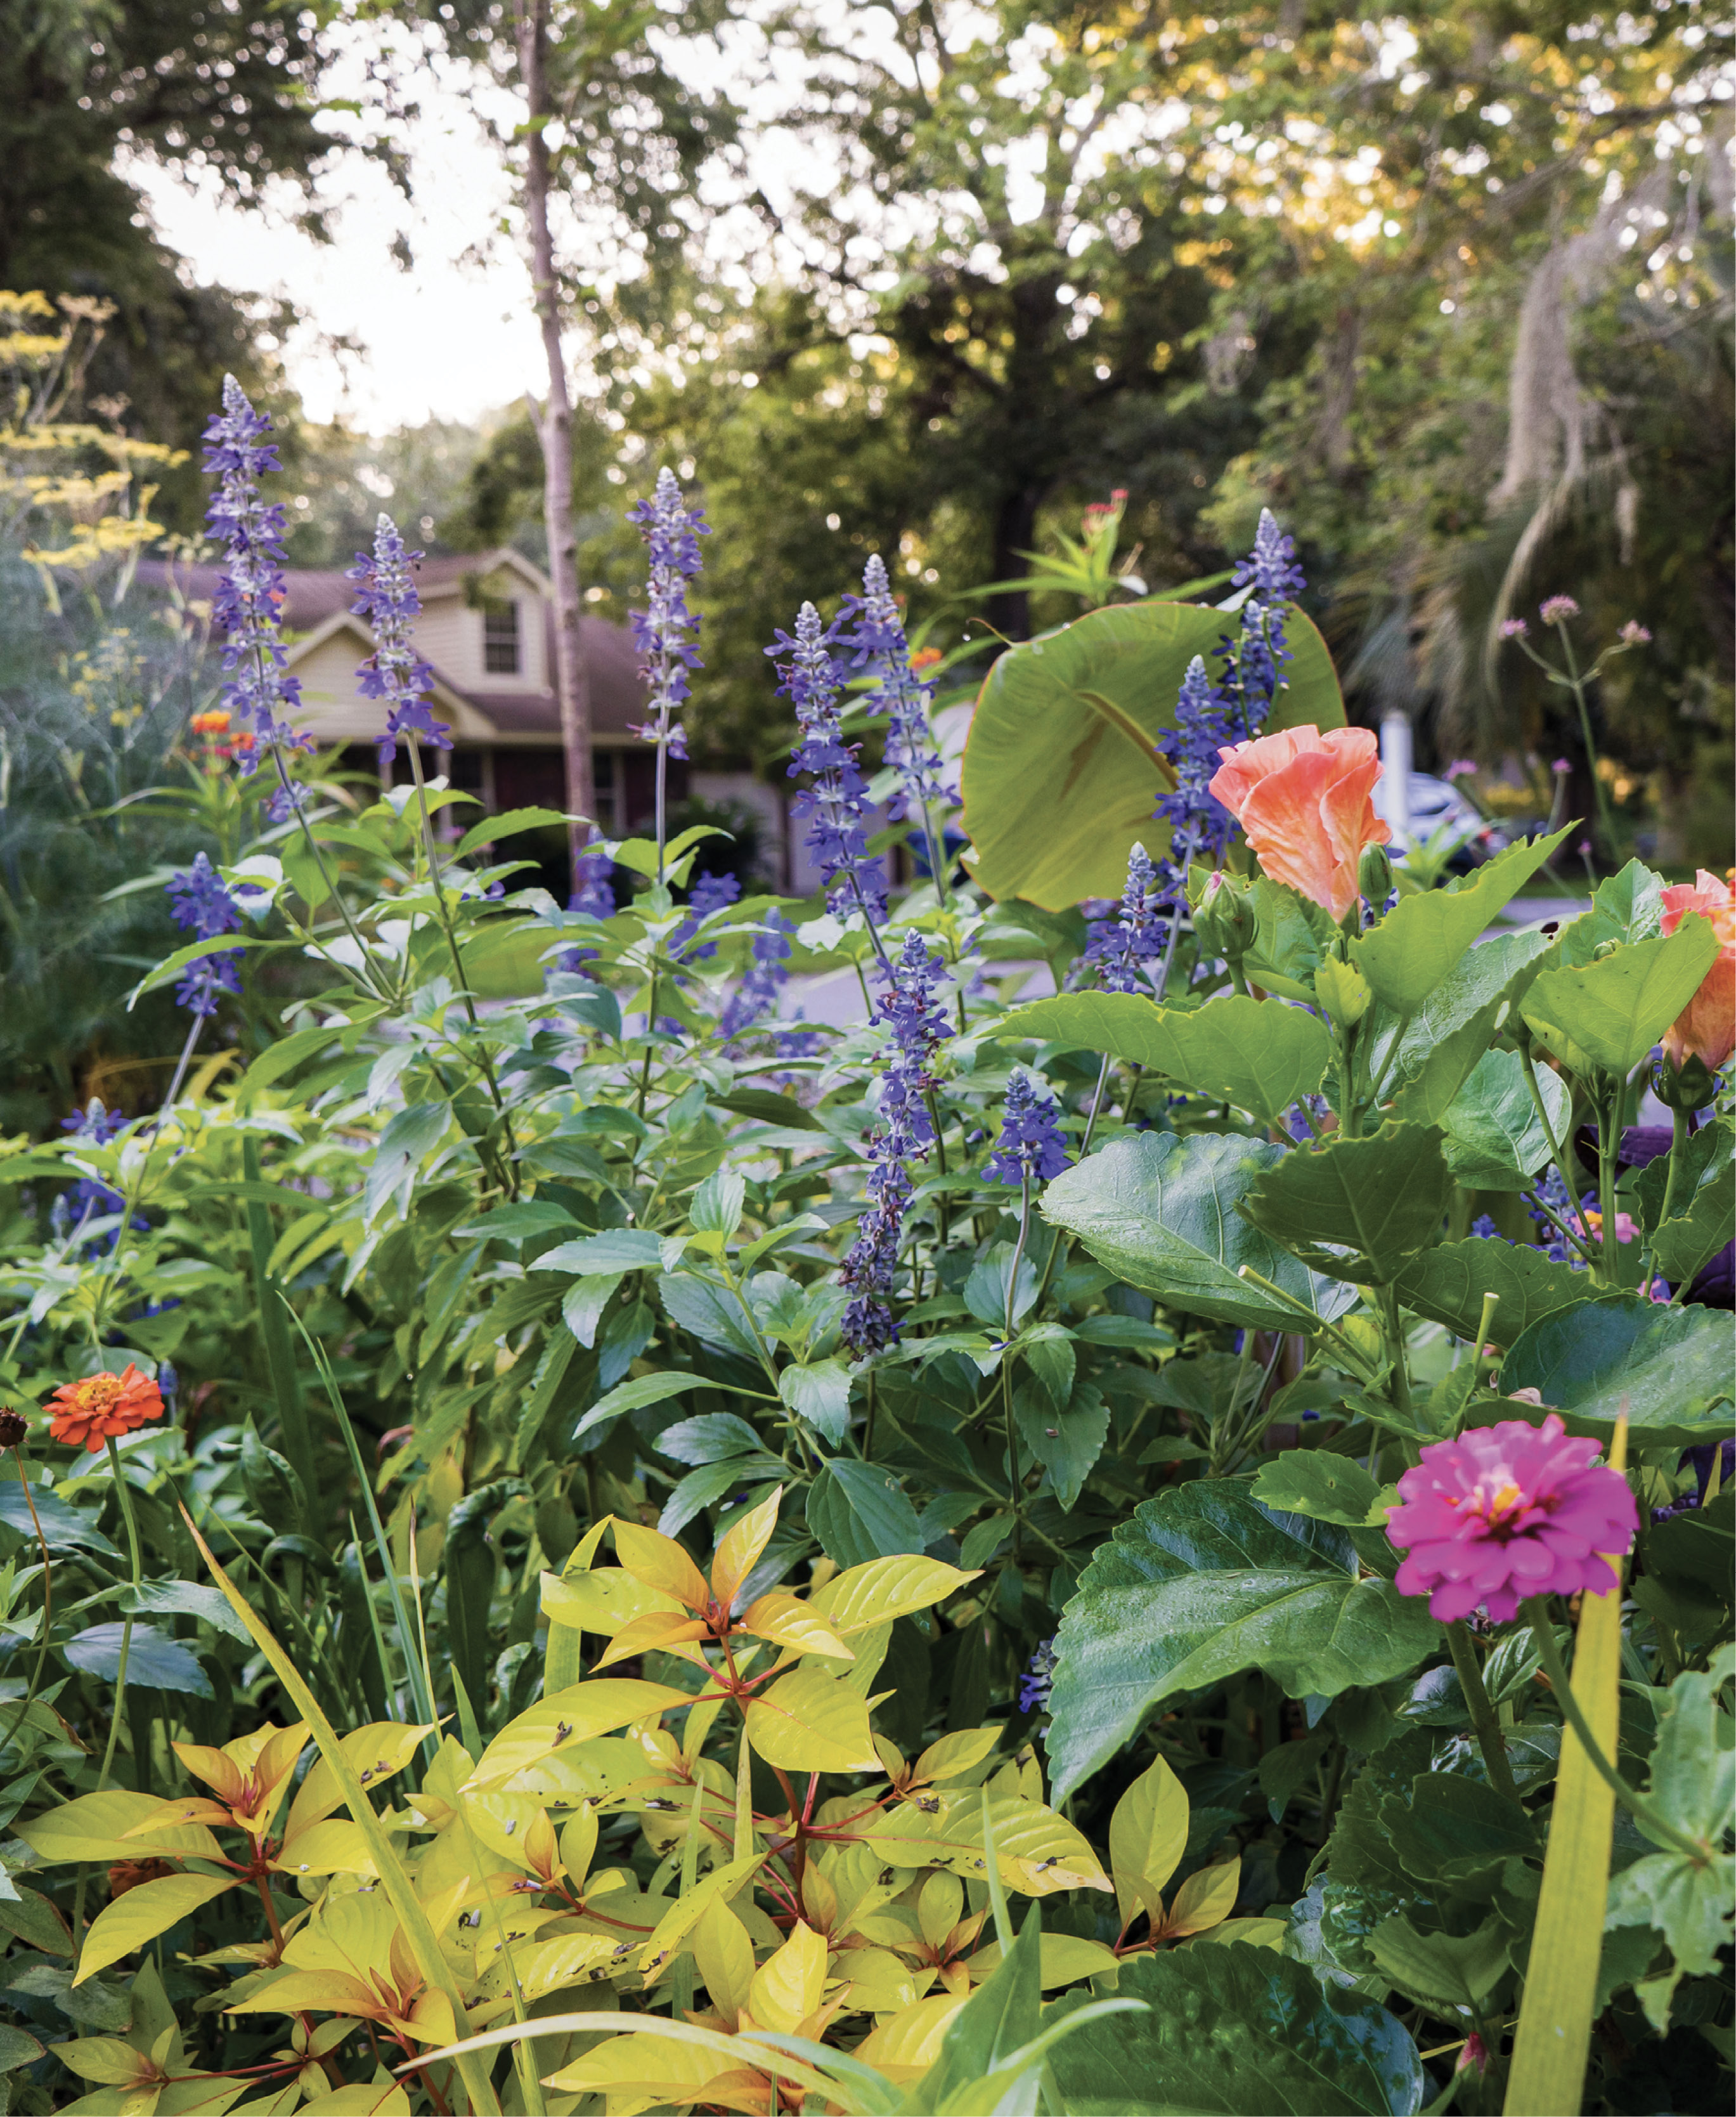 Buzz Worthy: A ‘Lime Sizzler’ firecracker shrub sets off the deeper-green foliage and bright blooms of bronze fennel, ’Mystic Spires Blue’ salvia, zinnias, and hibiscus that attract bees, hummingbirds, and butterflies.